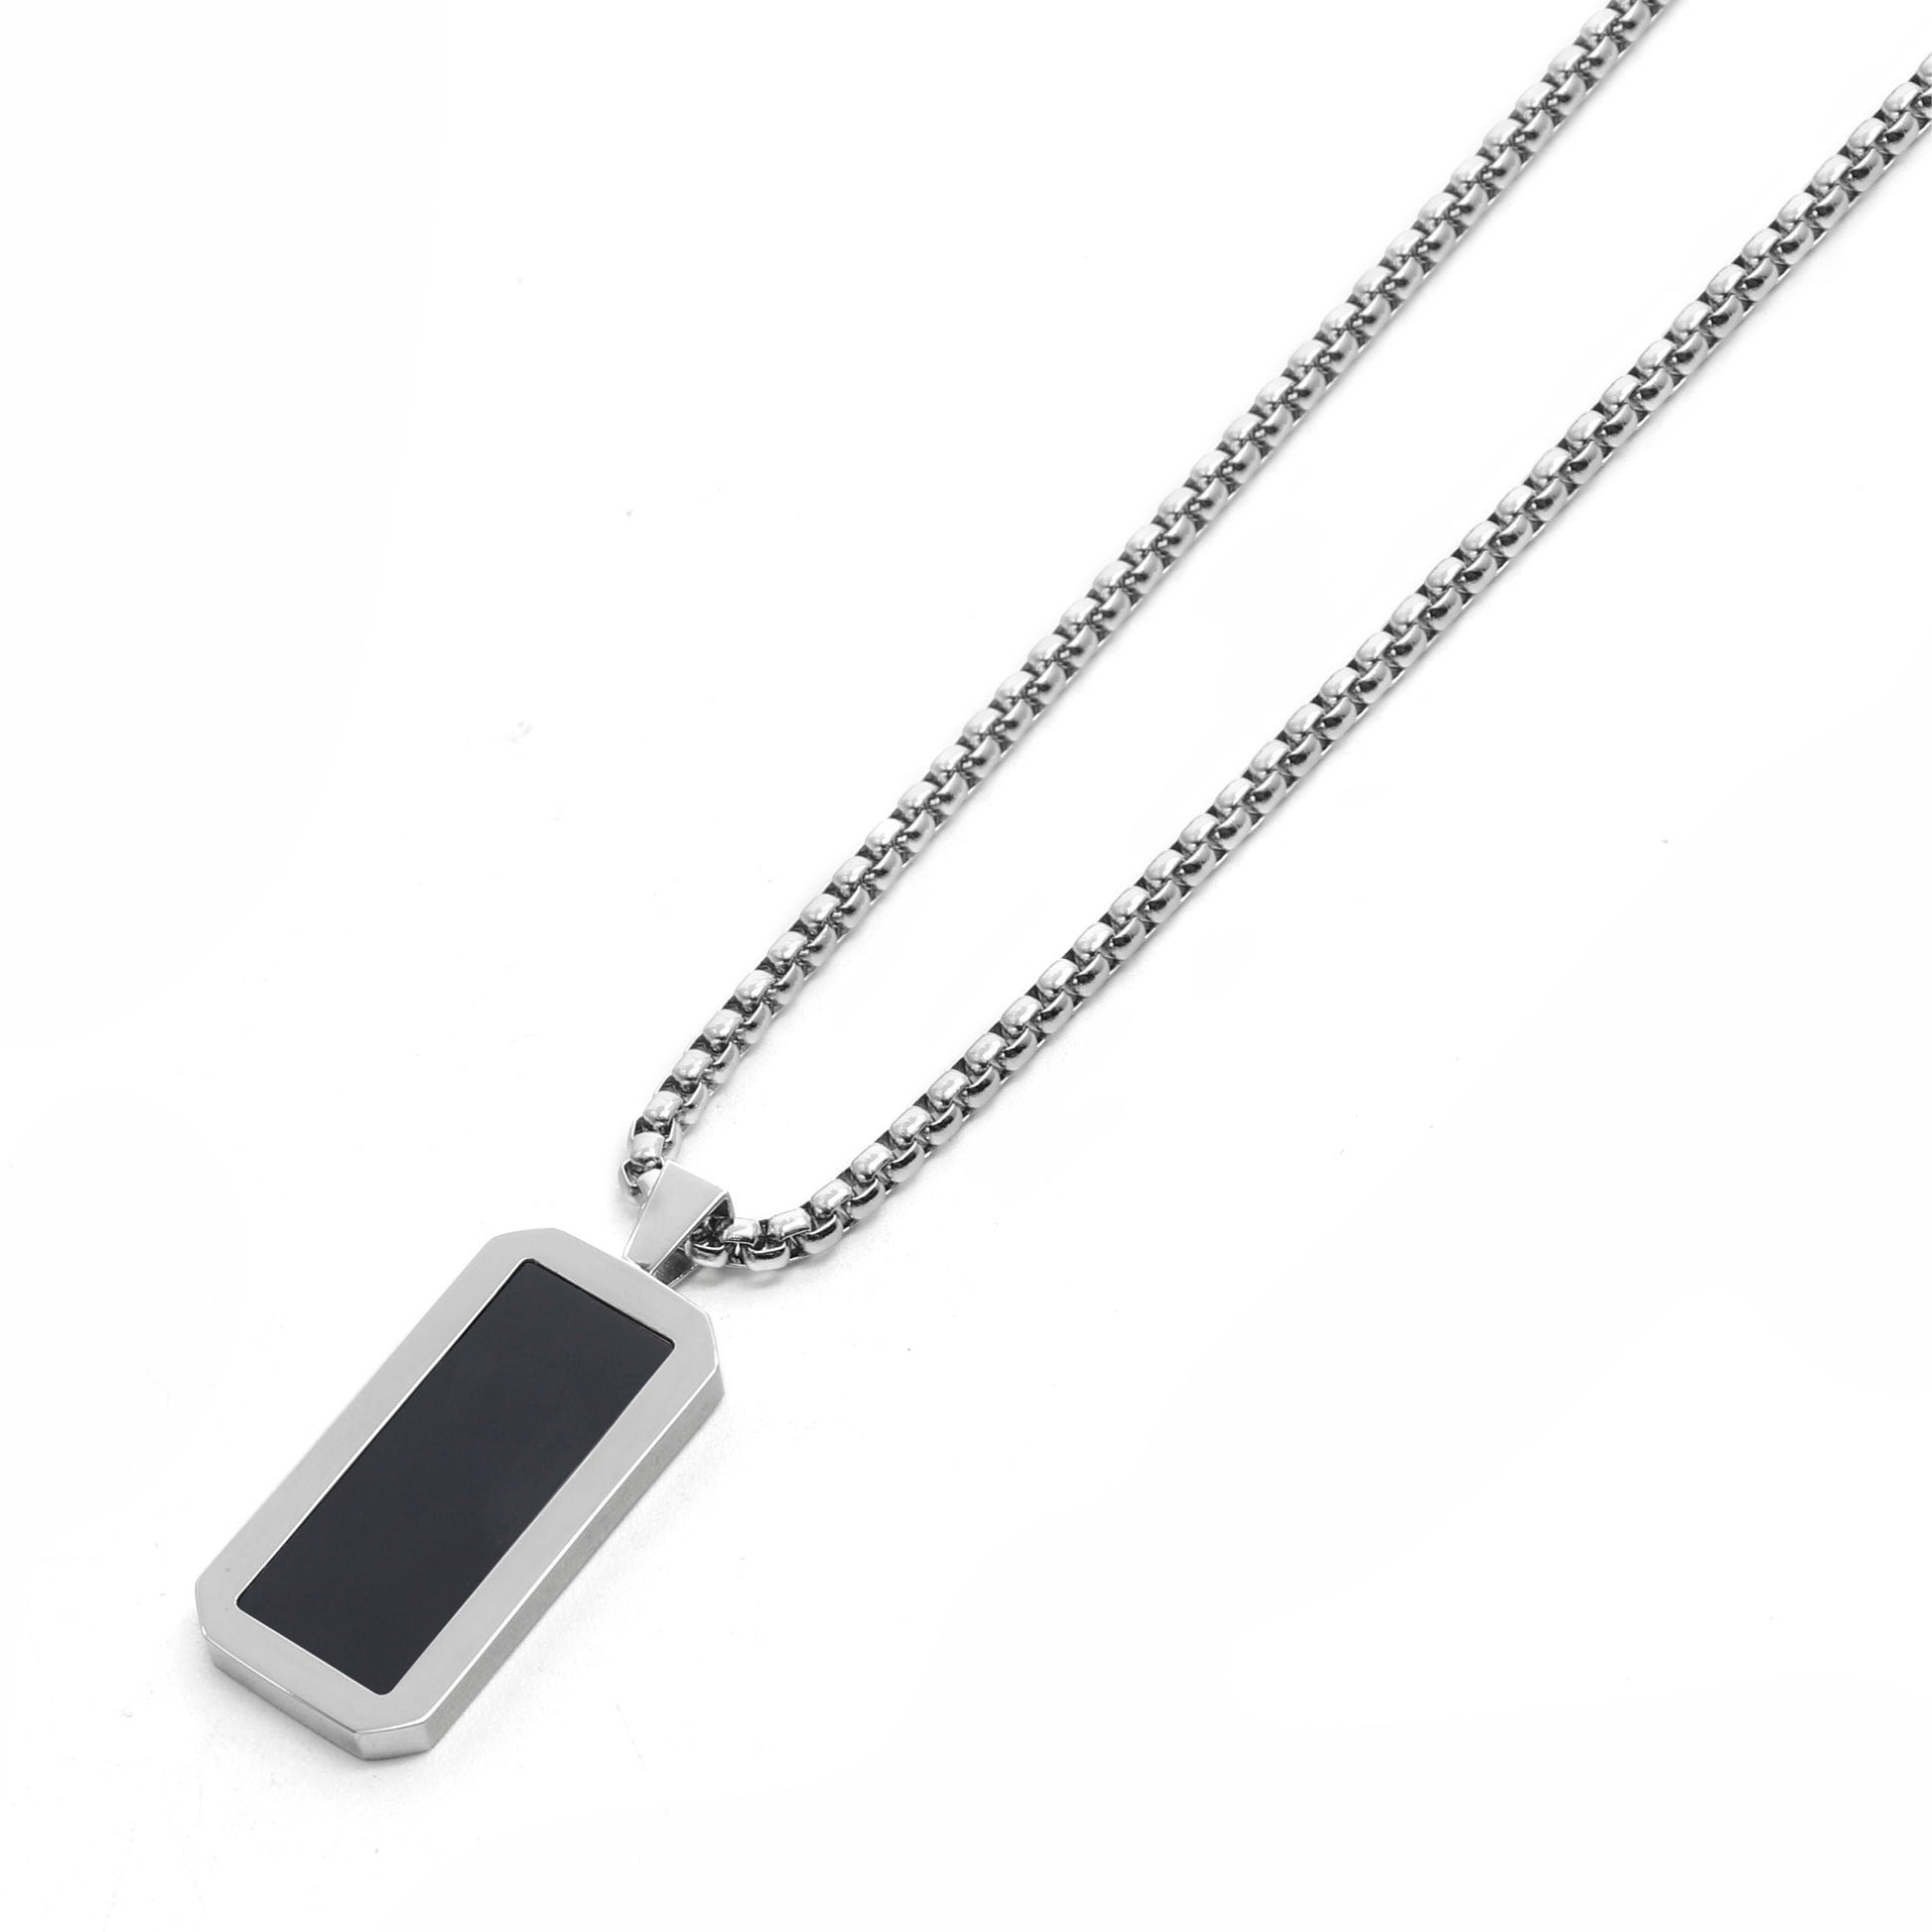 Necklaces - Silver Necklace With Rectangle Onyx Pendant